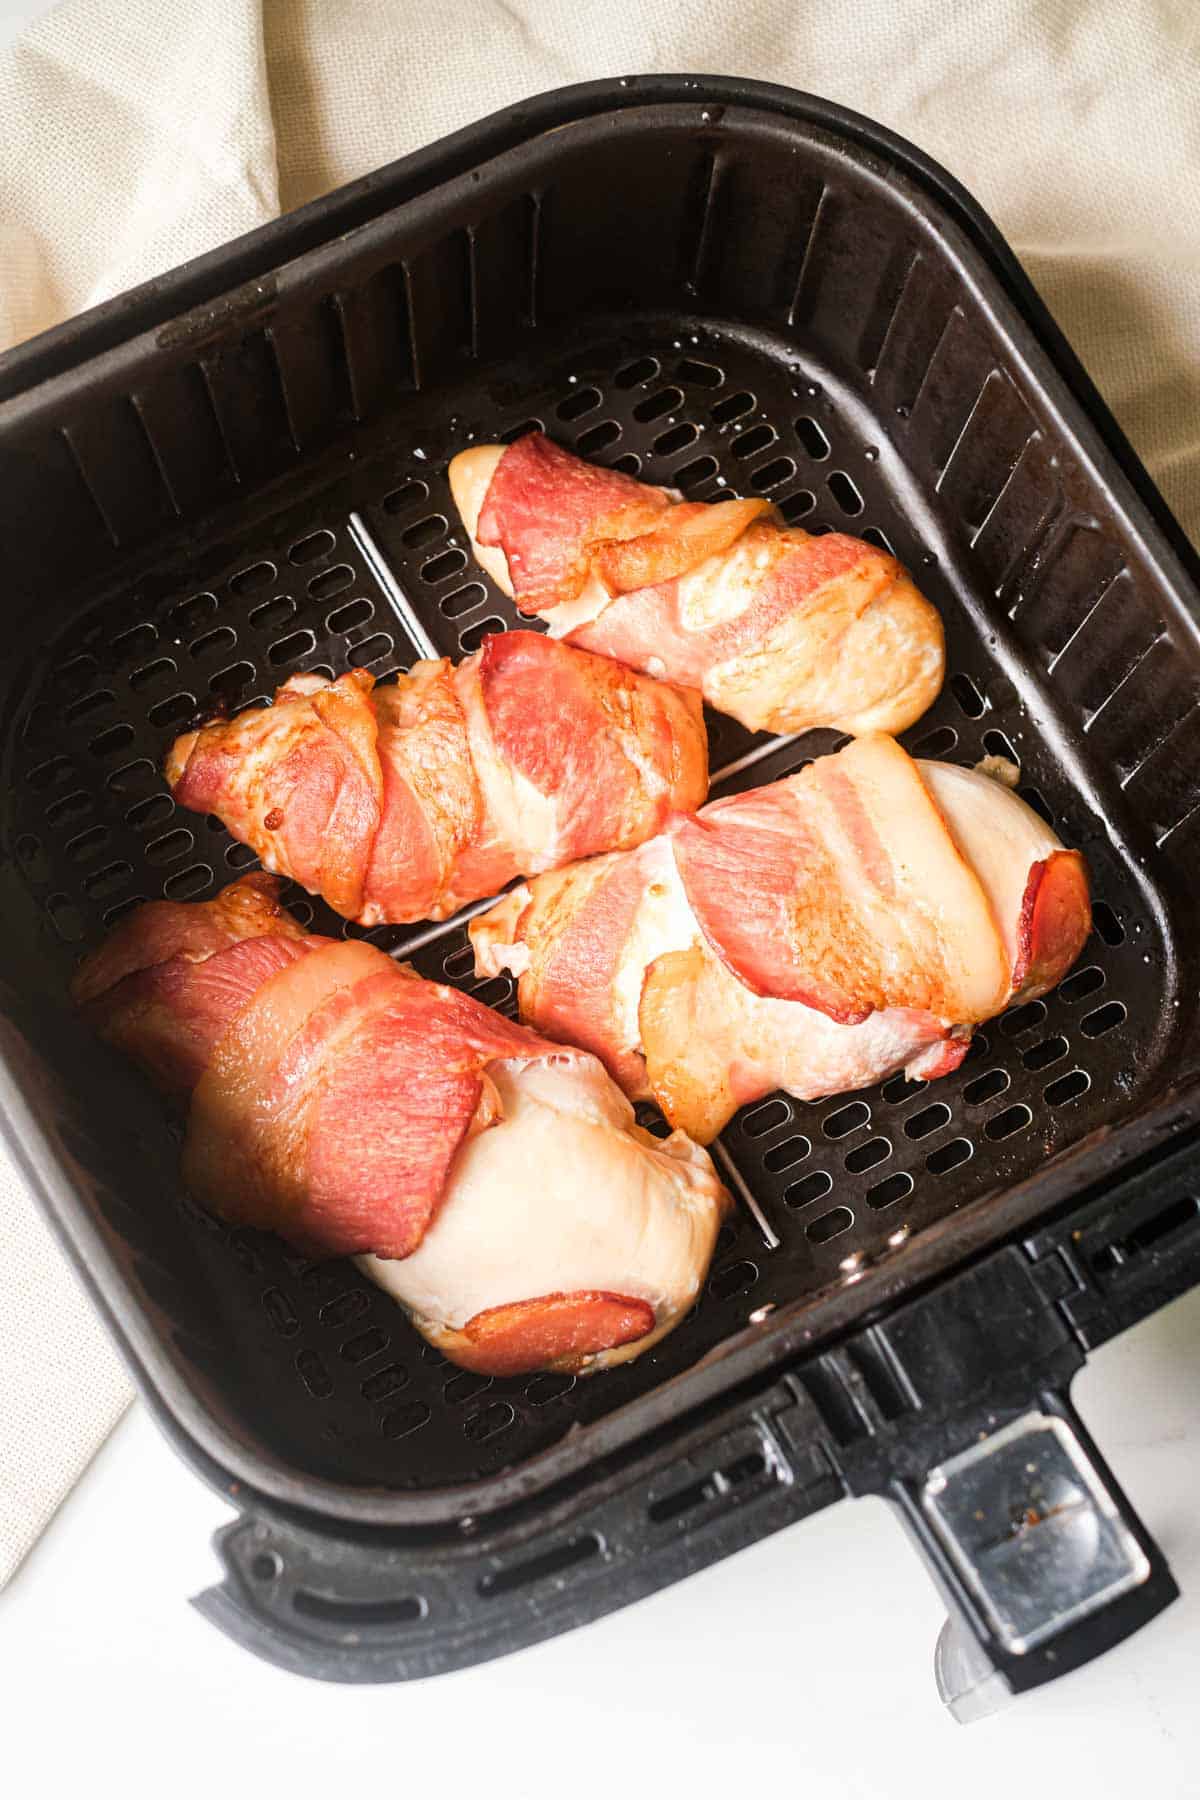 the finished bacon wrapped chicken breast in air fryer basket